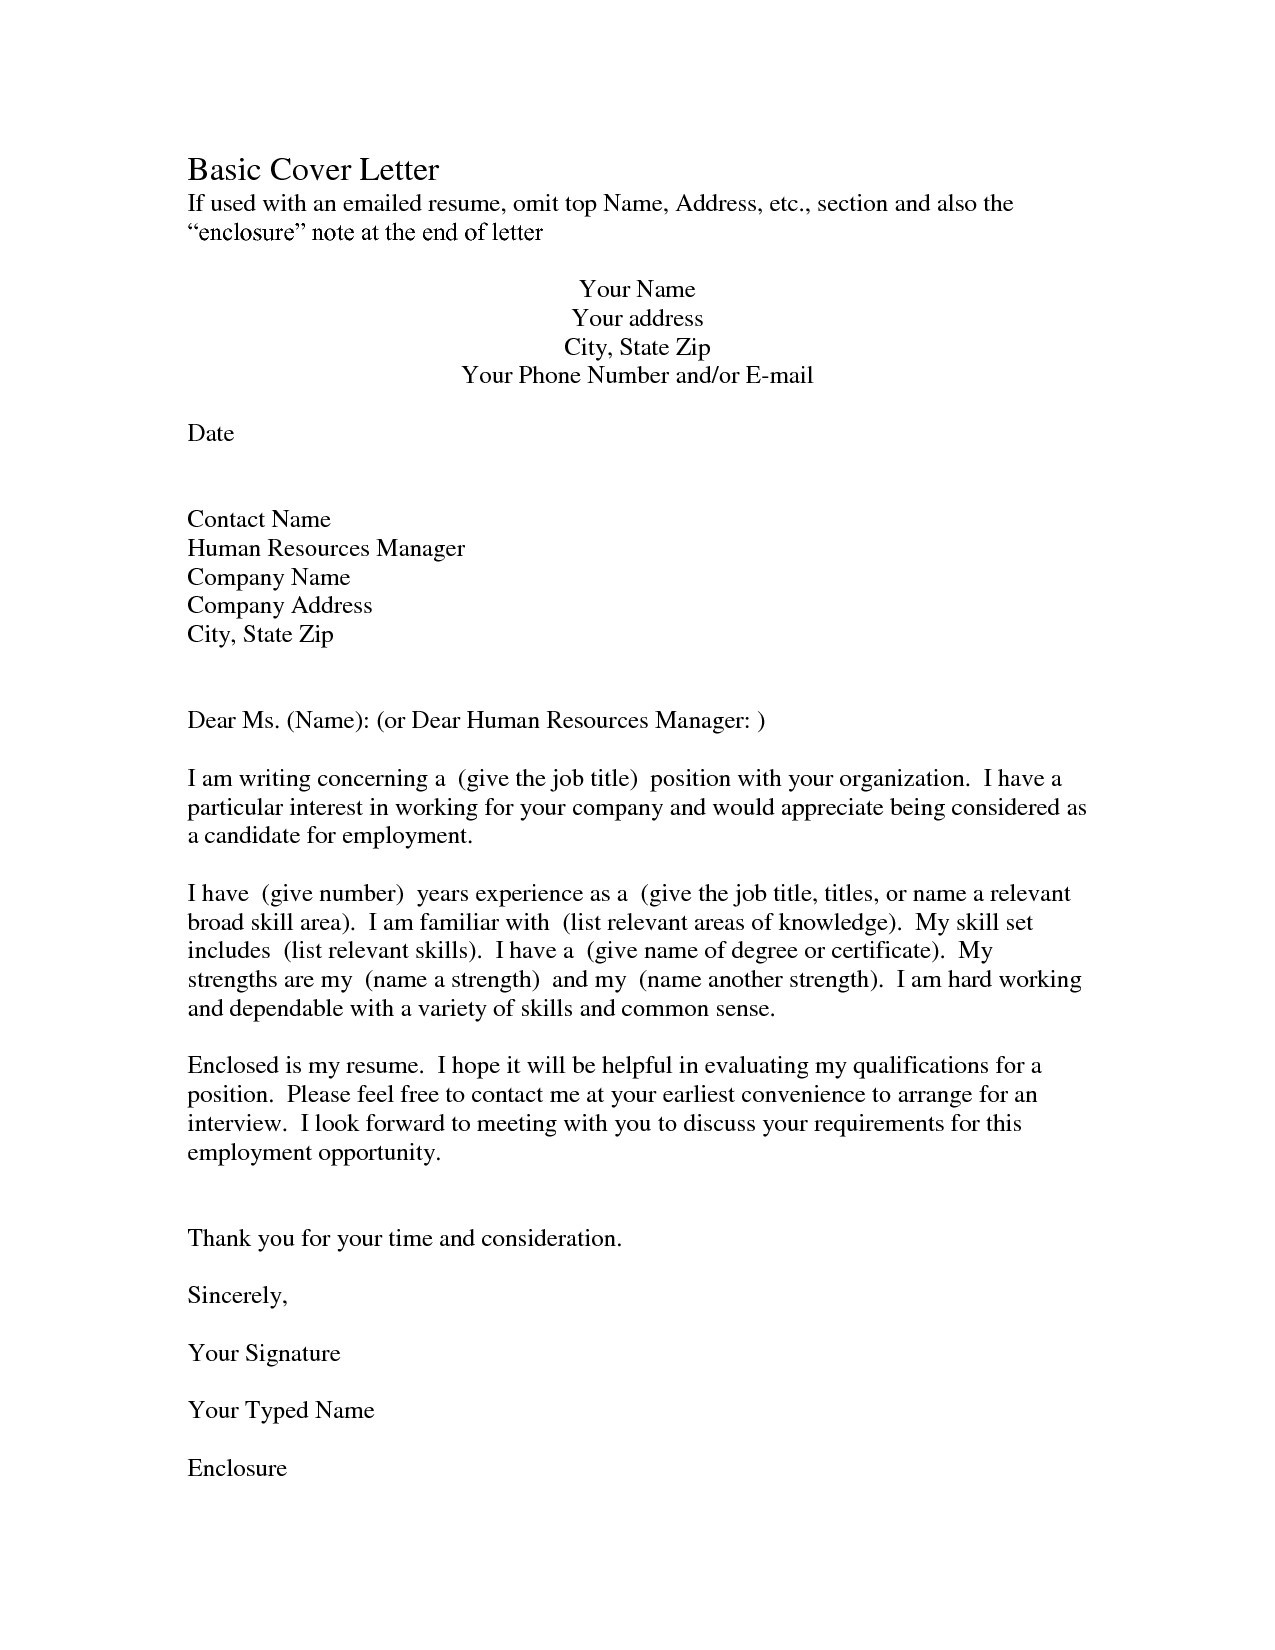 Cover Letter Template for Human Resources - Free Resume Cover Letter format S